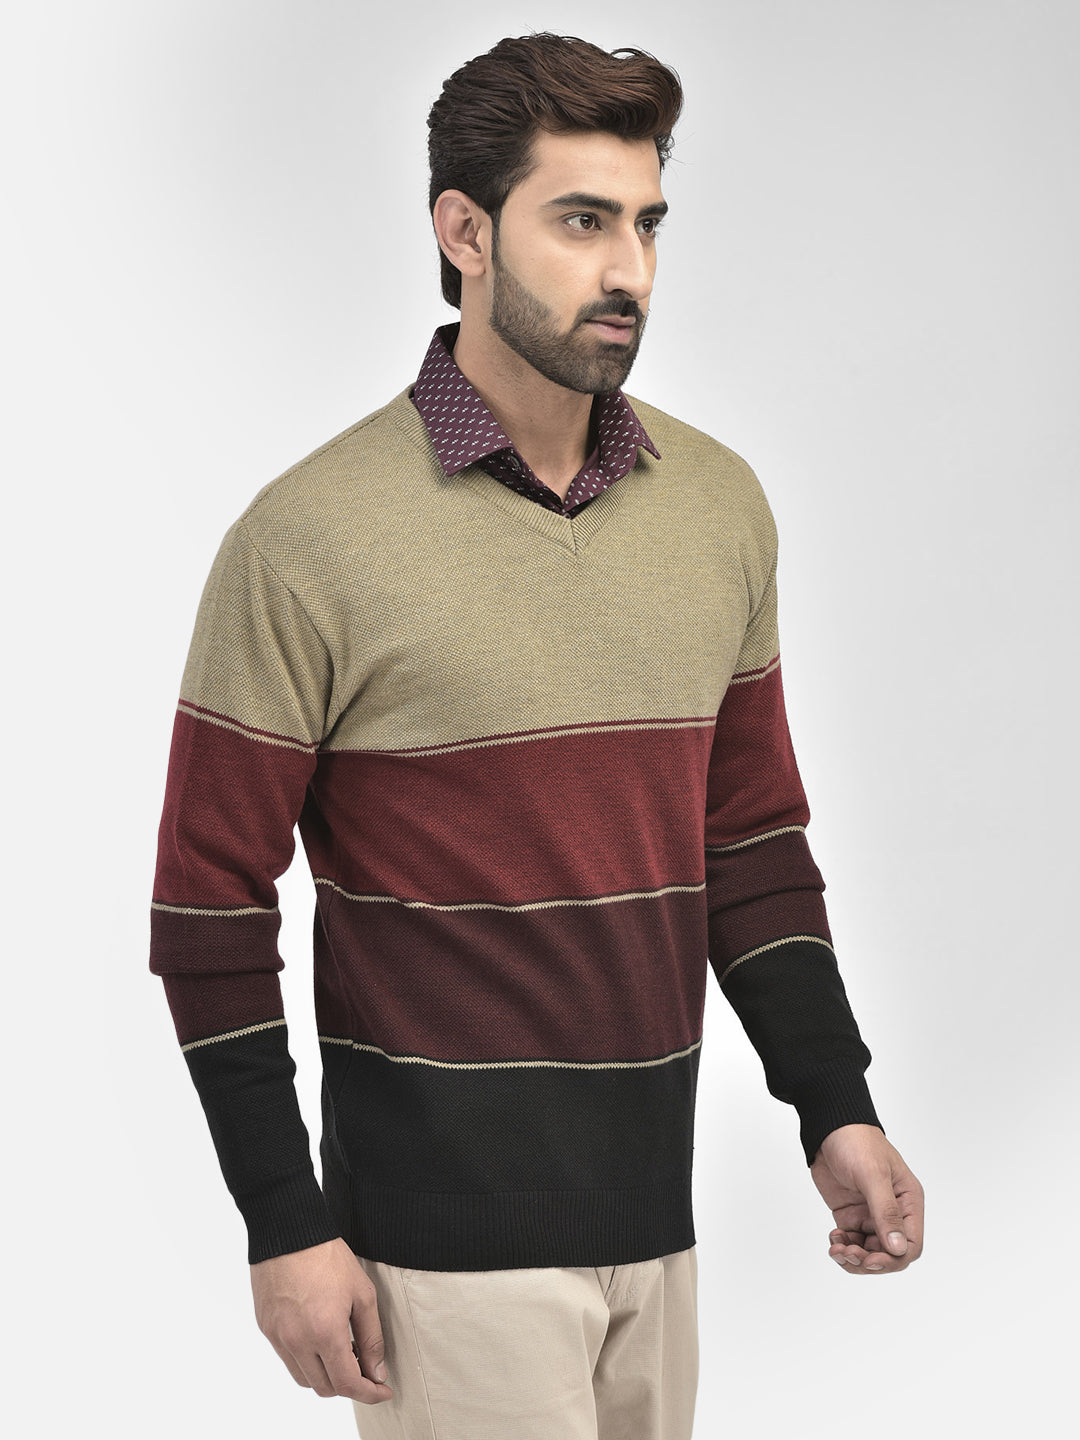 Brown Colourblocked V-Neck Sweaters.